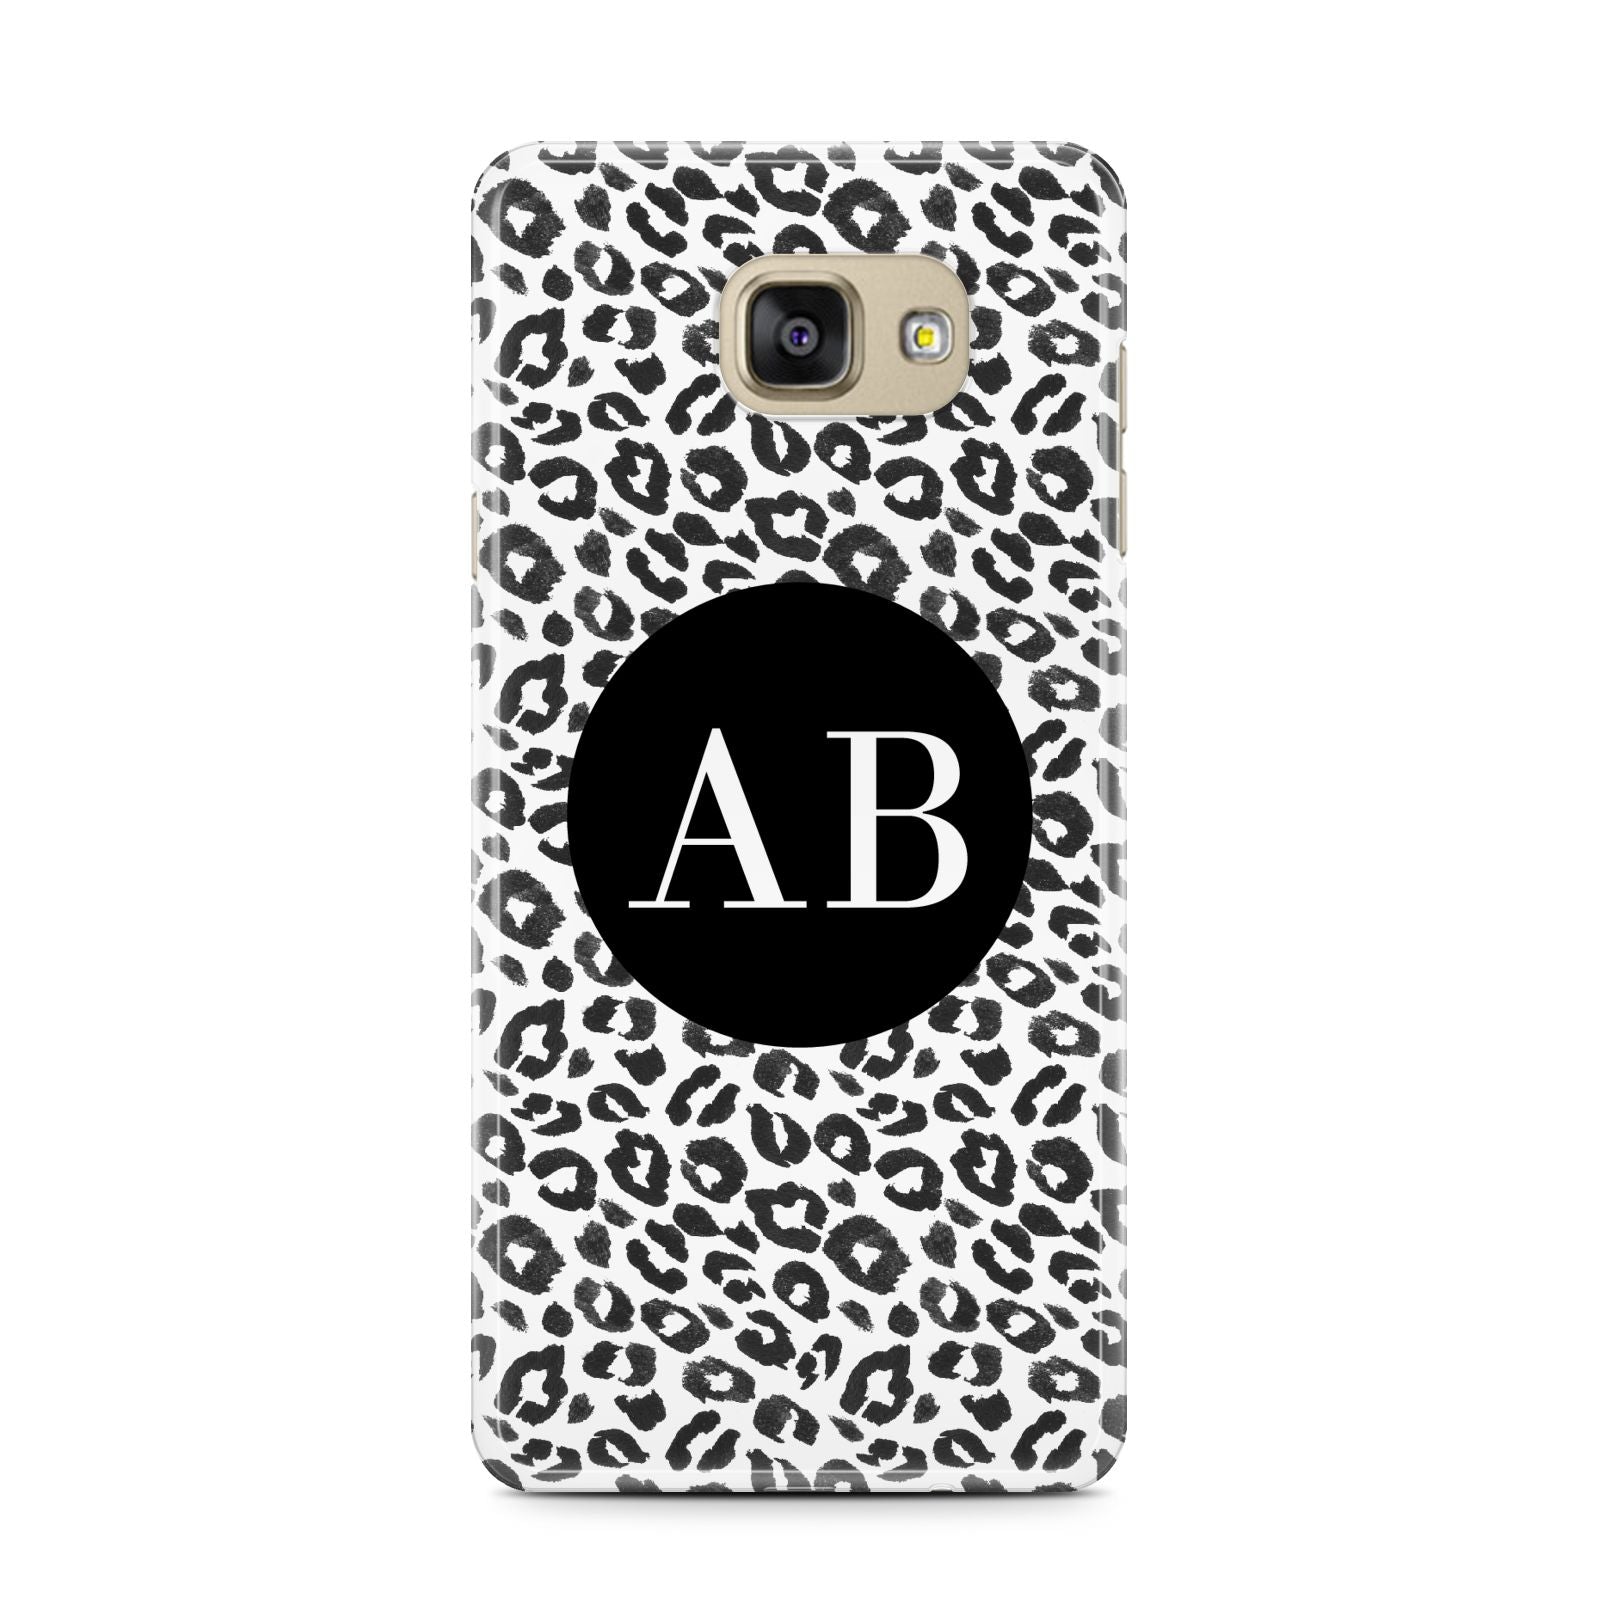 Leopard Print Black and White Samsung Galaxy A7 2016 Case on gold phone